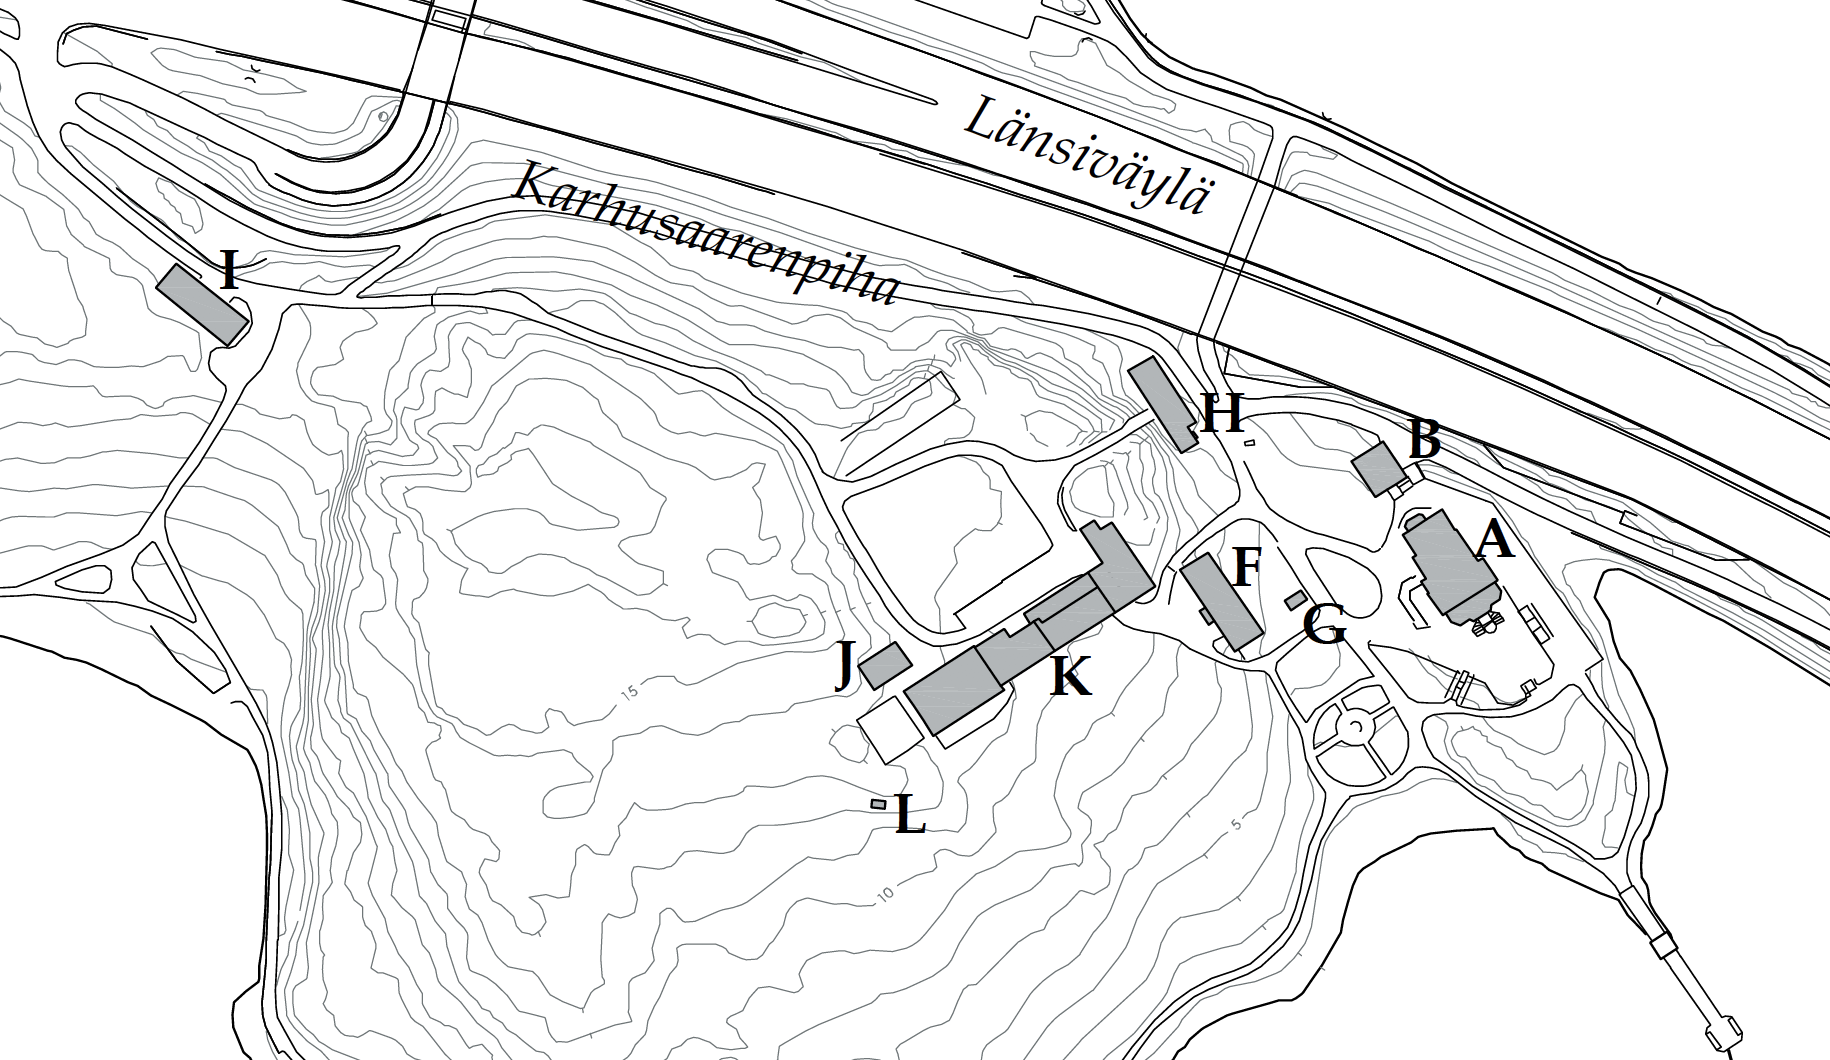 Site plan of the buildings